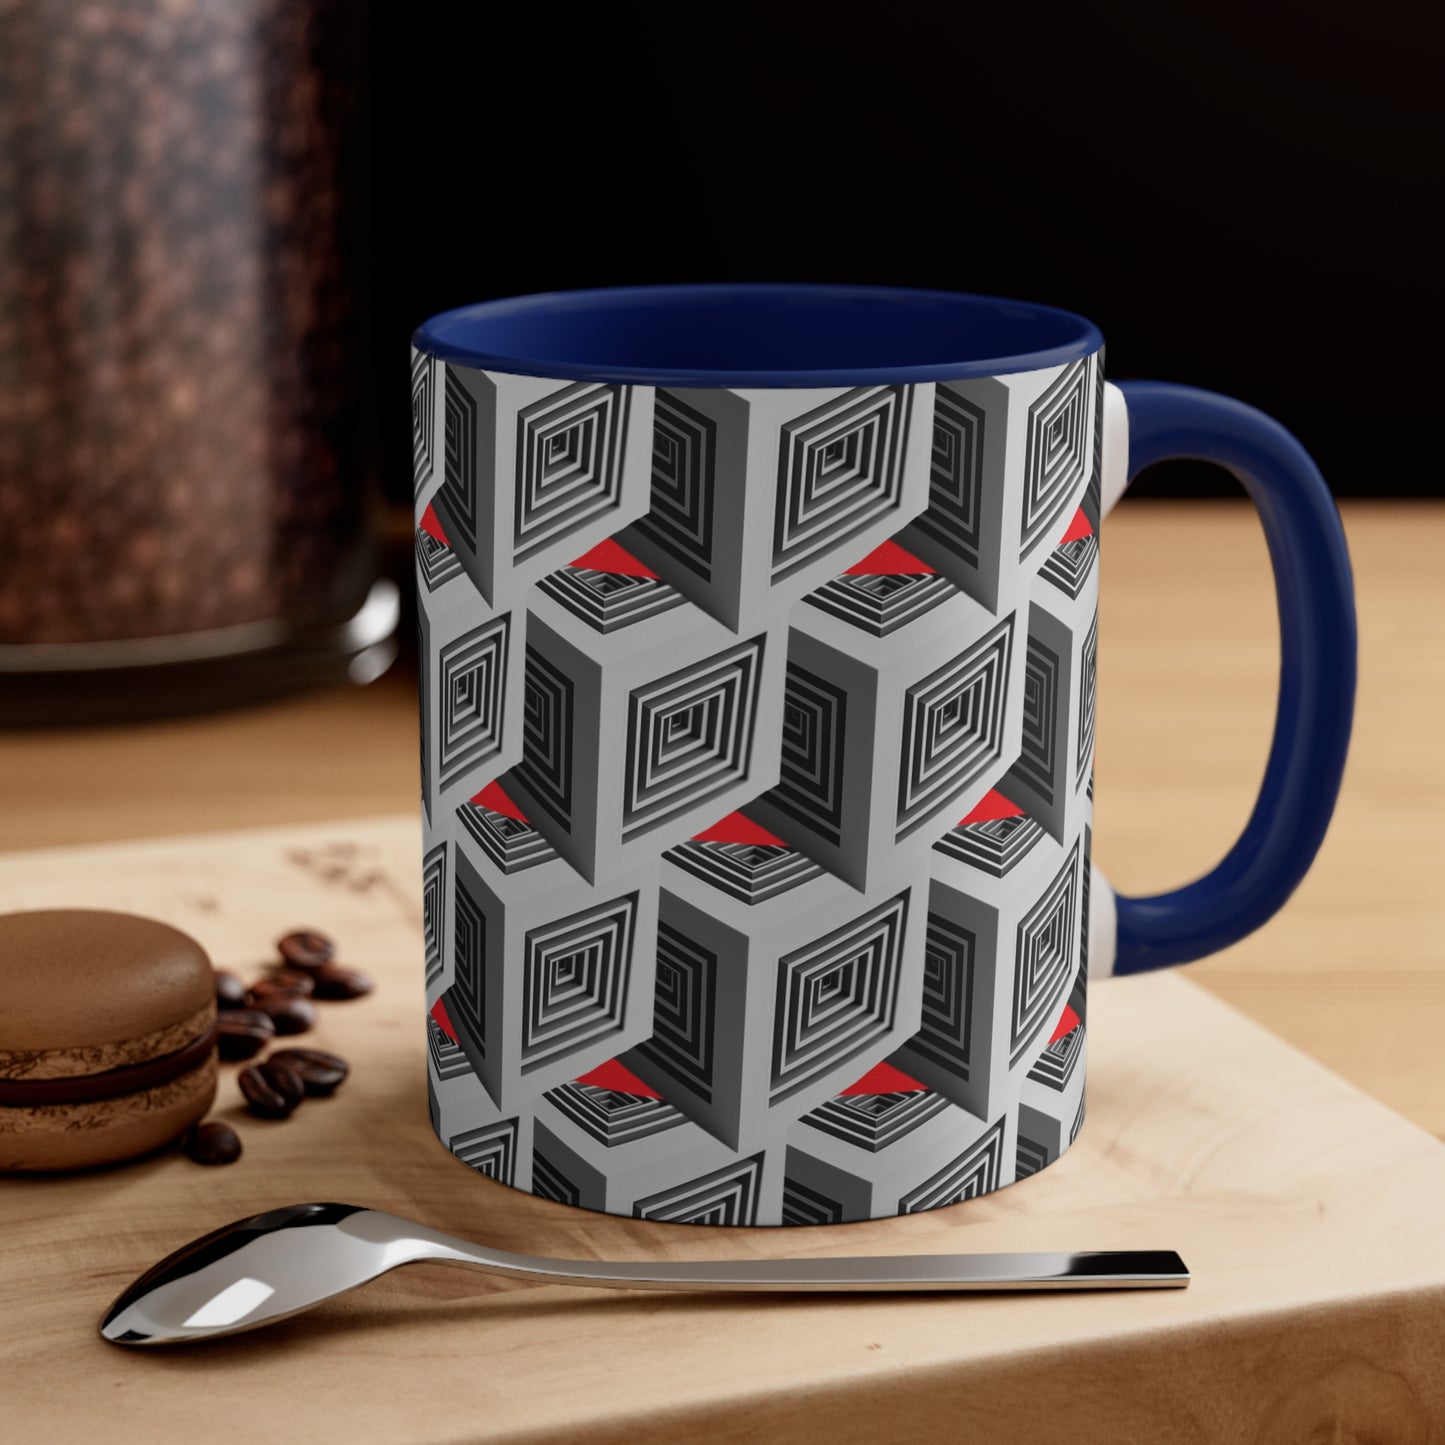 Geometric Cubes with Red